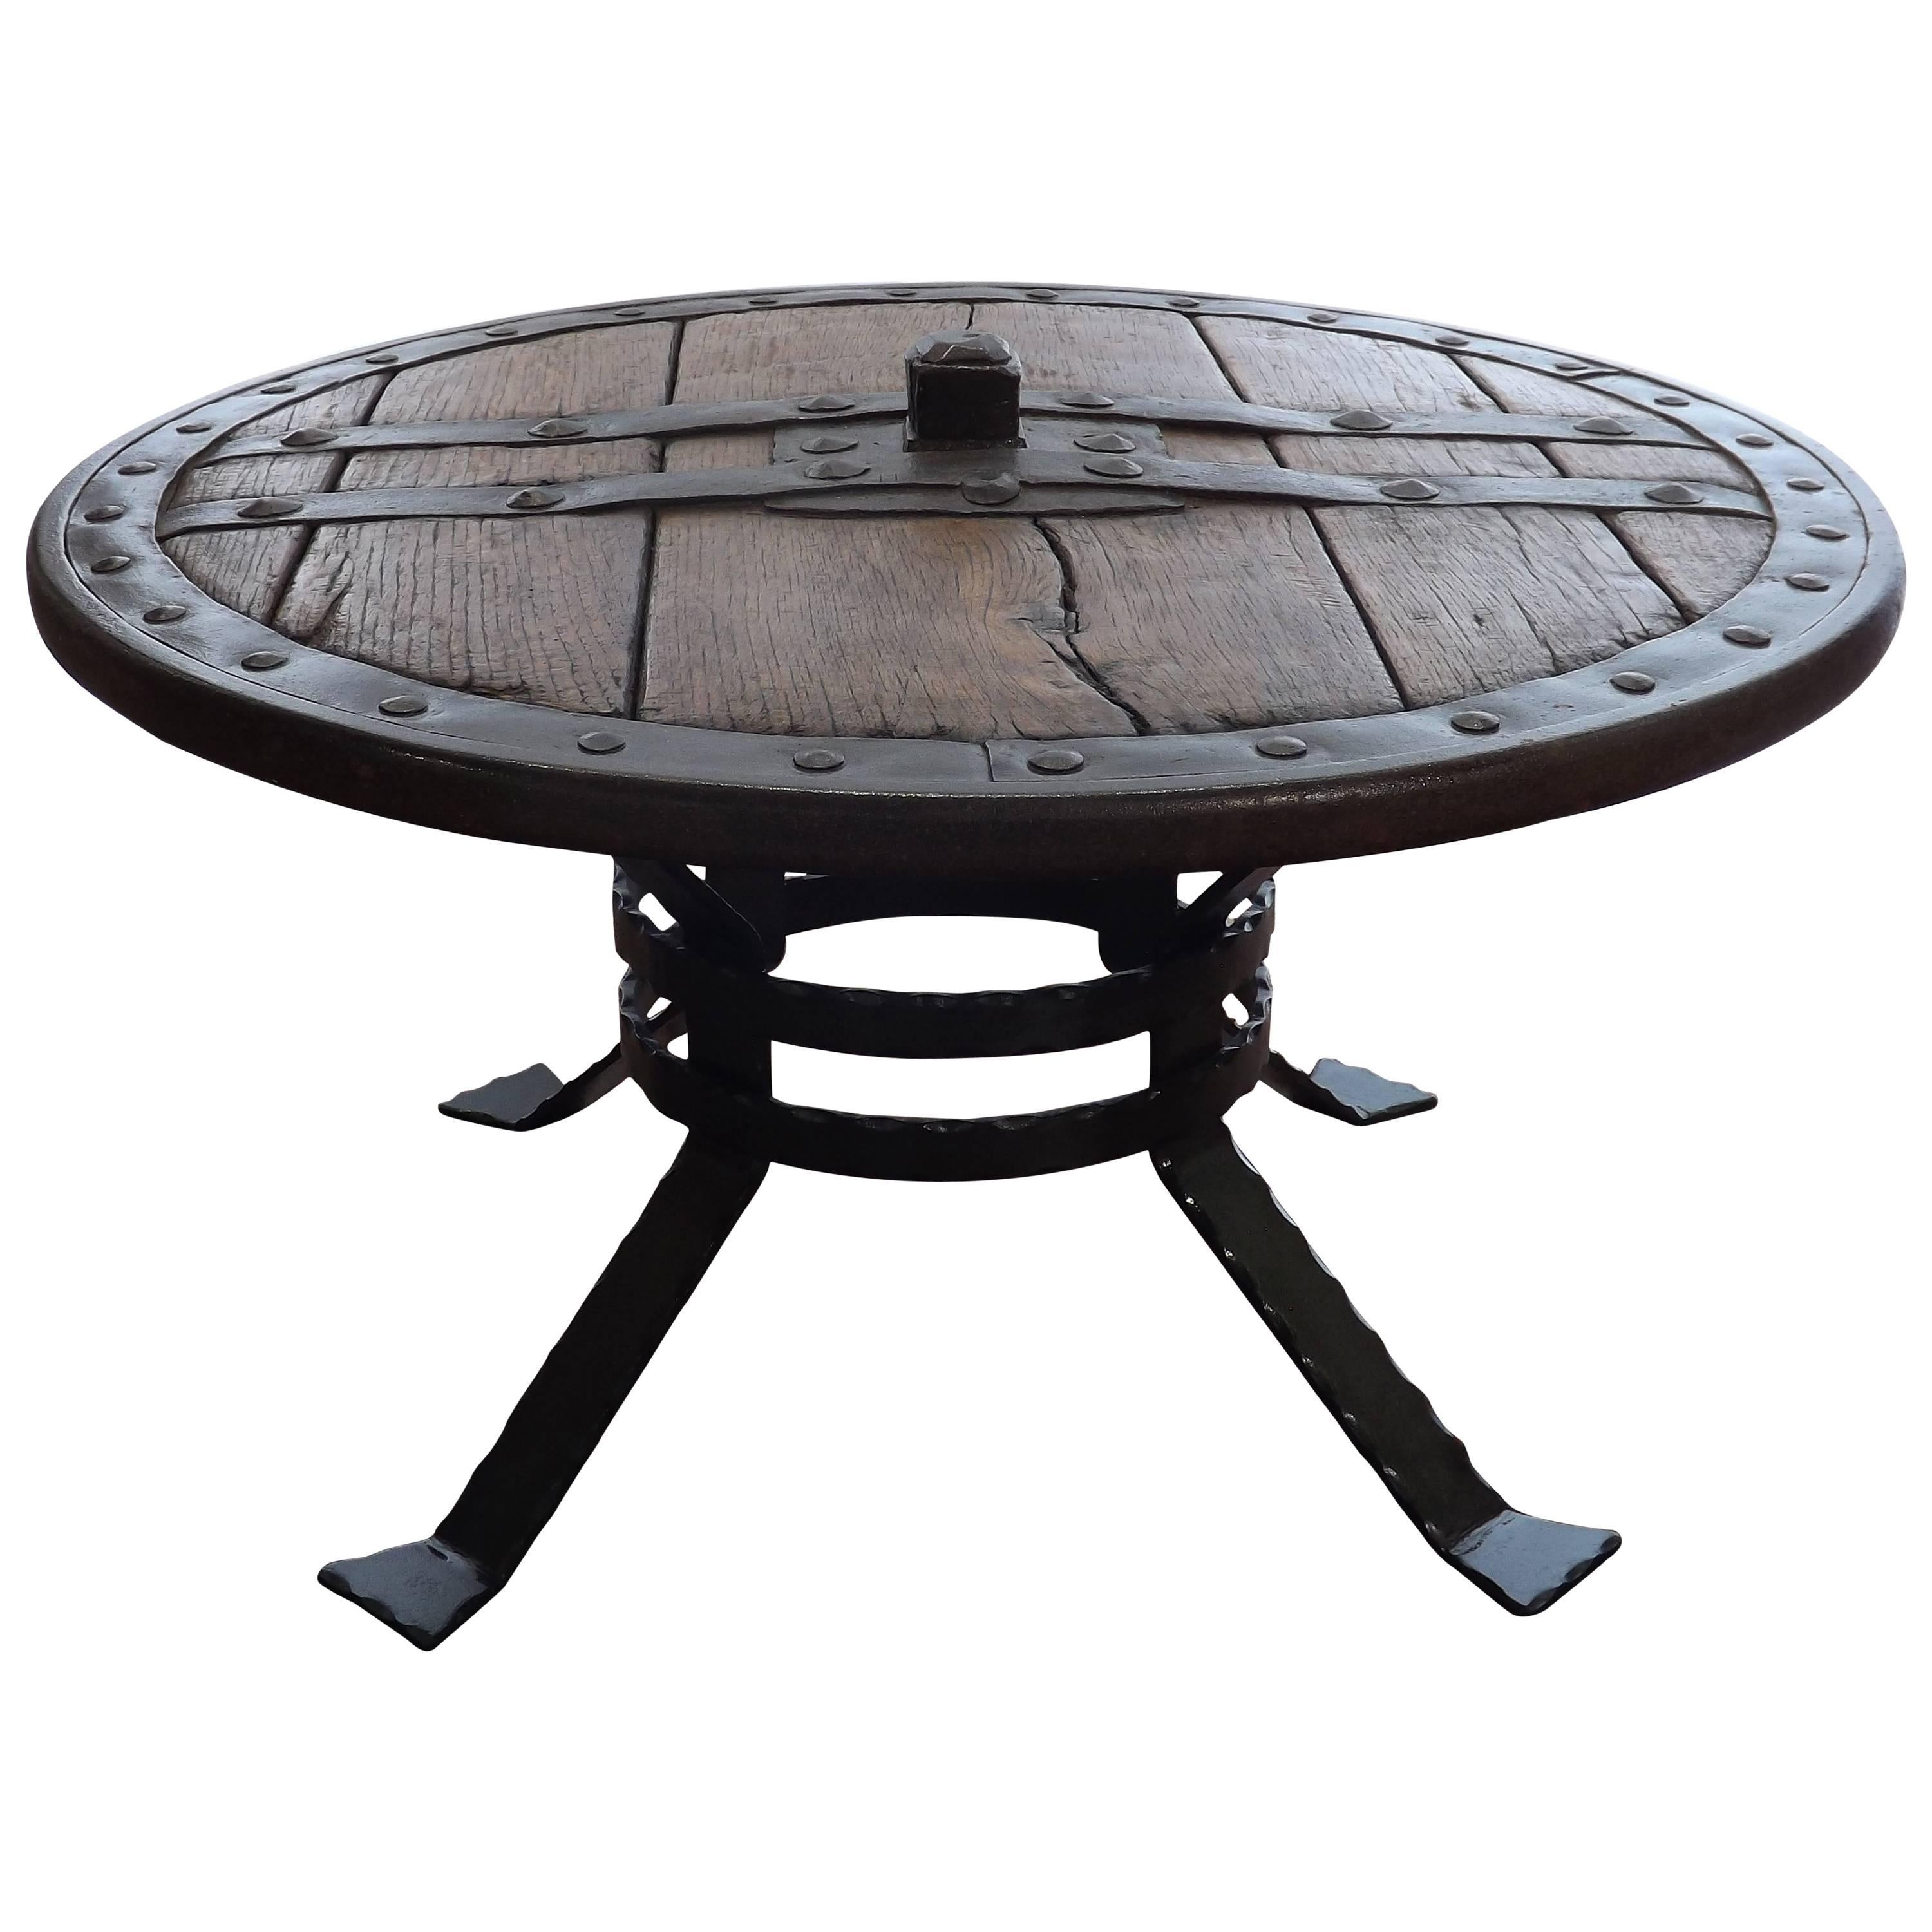 Medieval Forged Iron and Hardwood Wagon or Chariot Wheel Coffee Table For Sale